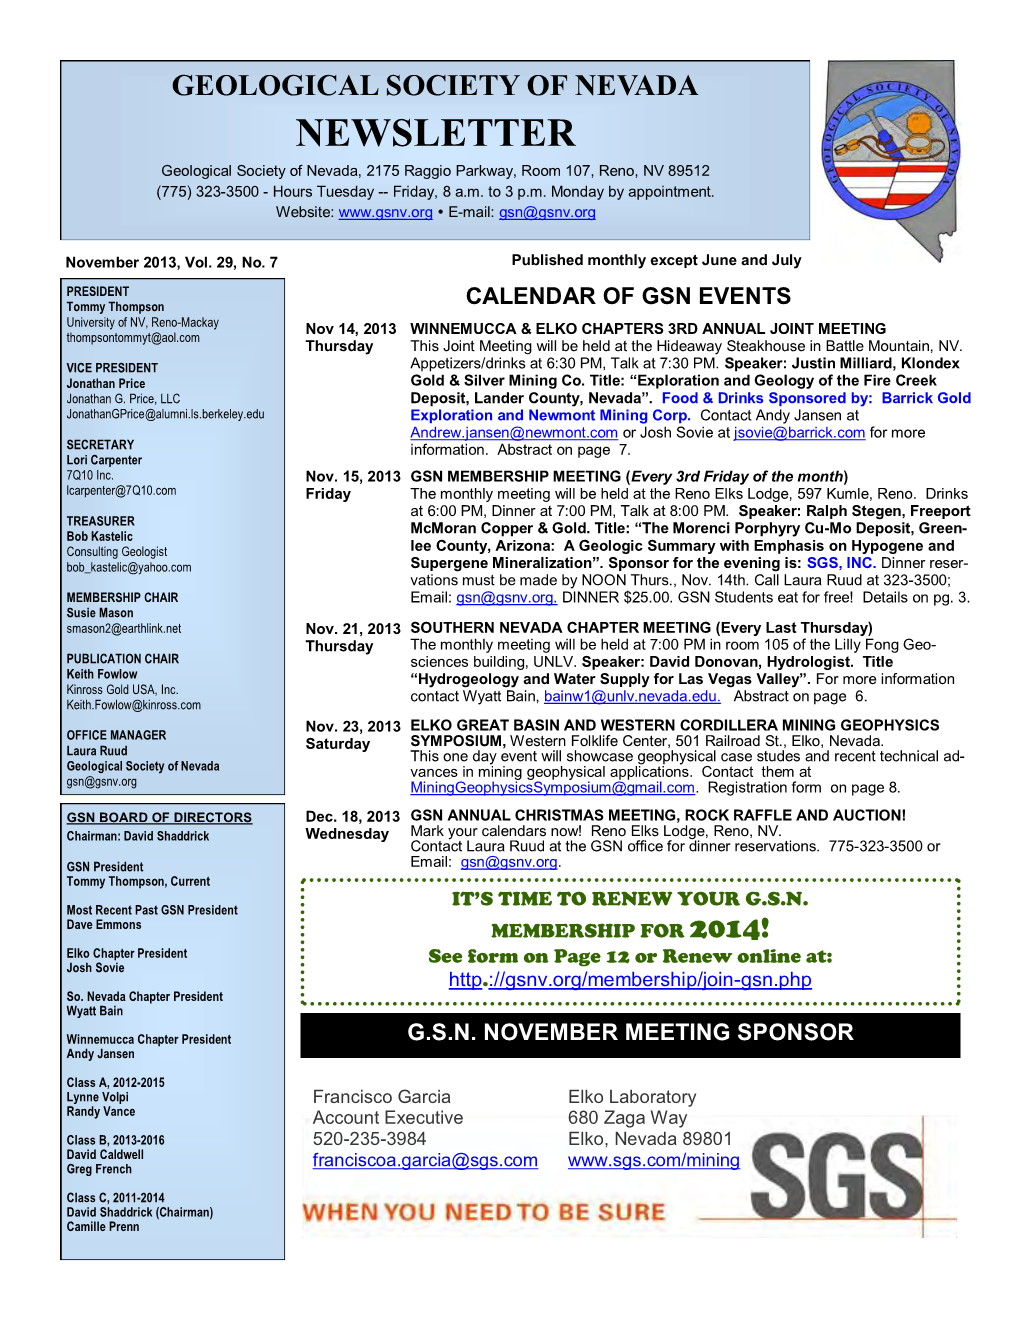 NEWSLETTER Geological Society of Nevada, 2175 Raggio Parkway, Room 107, Reno, NV 89512 (775) 323-3500 - Hours Tuesday -- Friday, 8 A.M